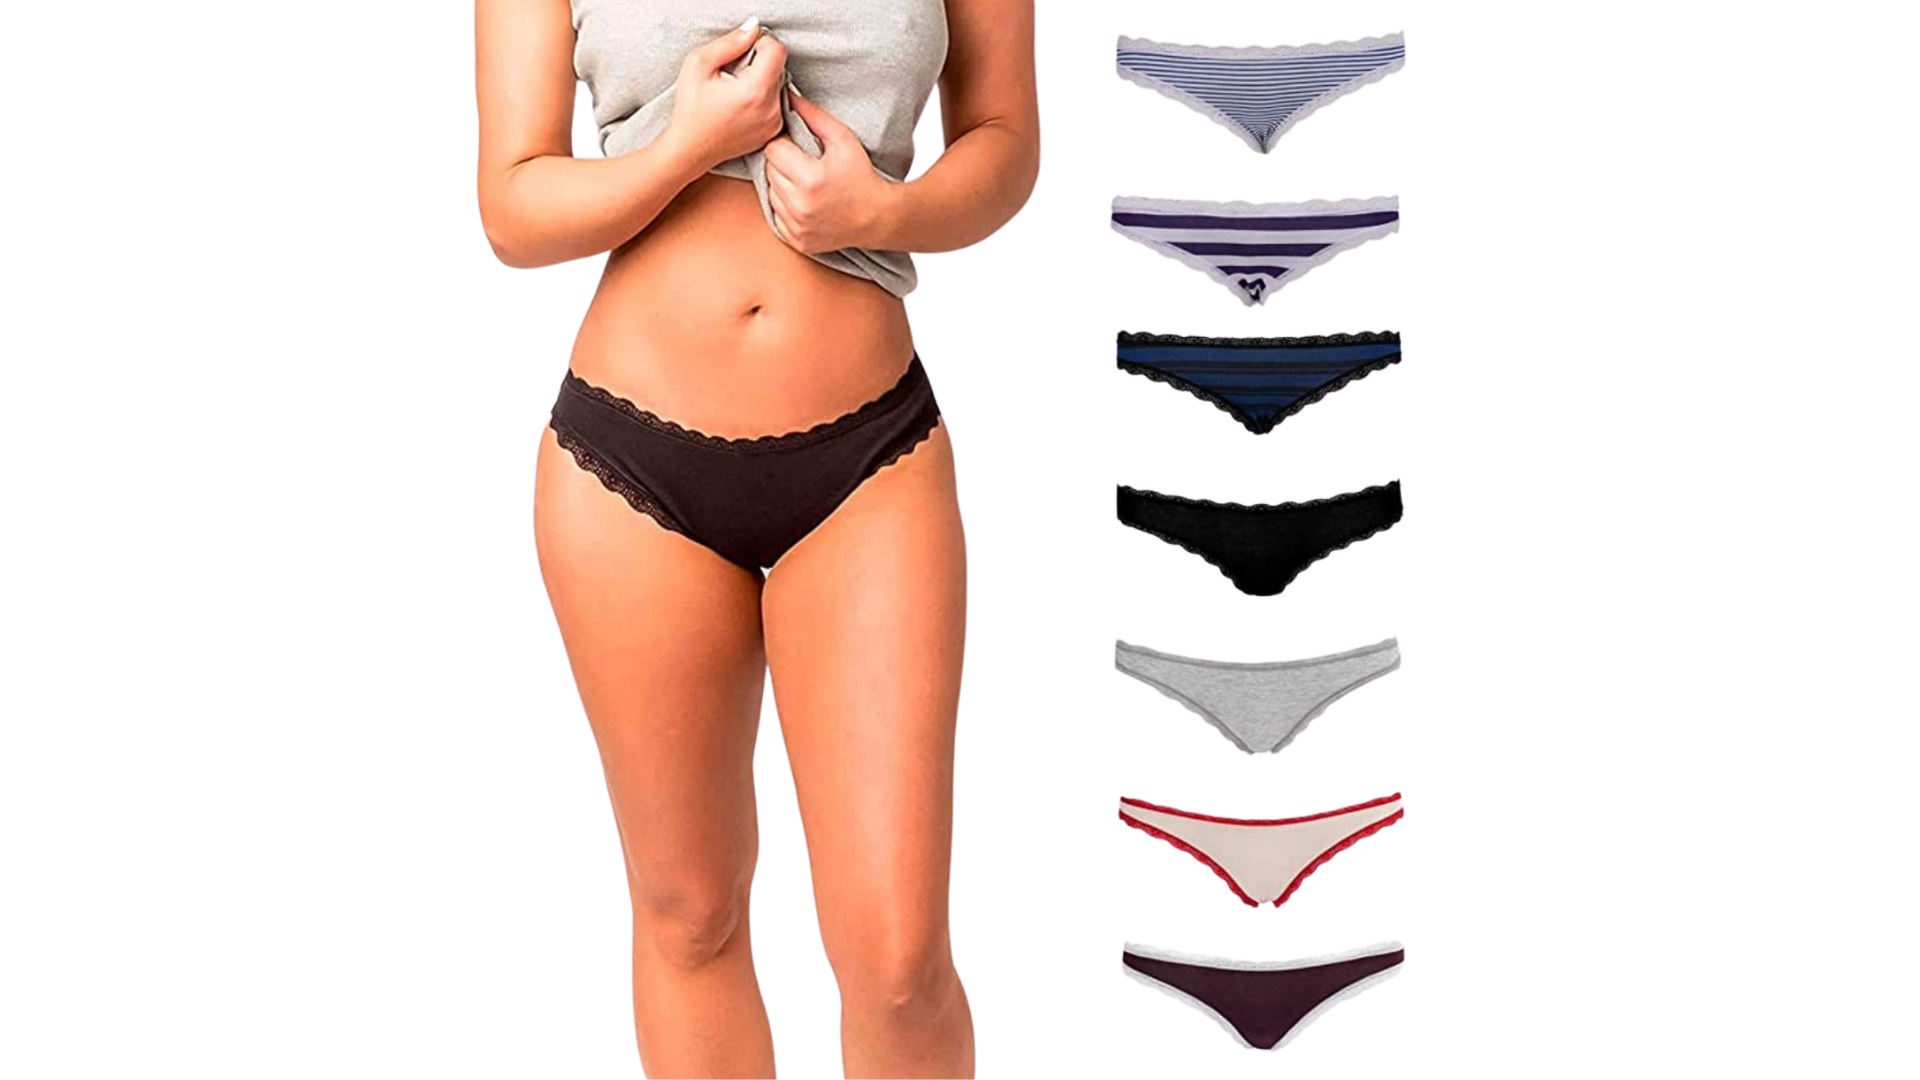 Emprella Women's Underwear Thong Panties - 10 Pack Colors and Patterns May  Vary - Multi M